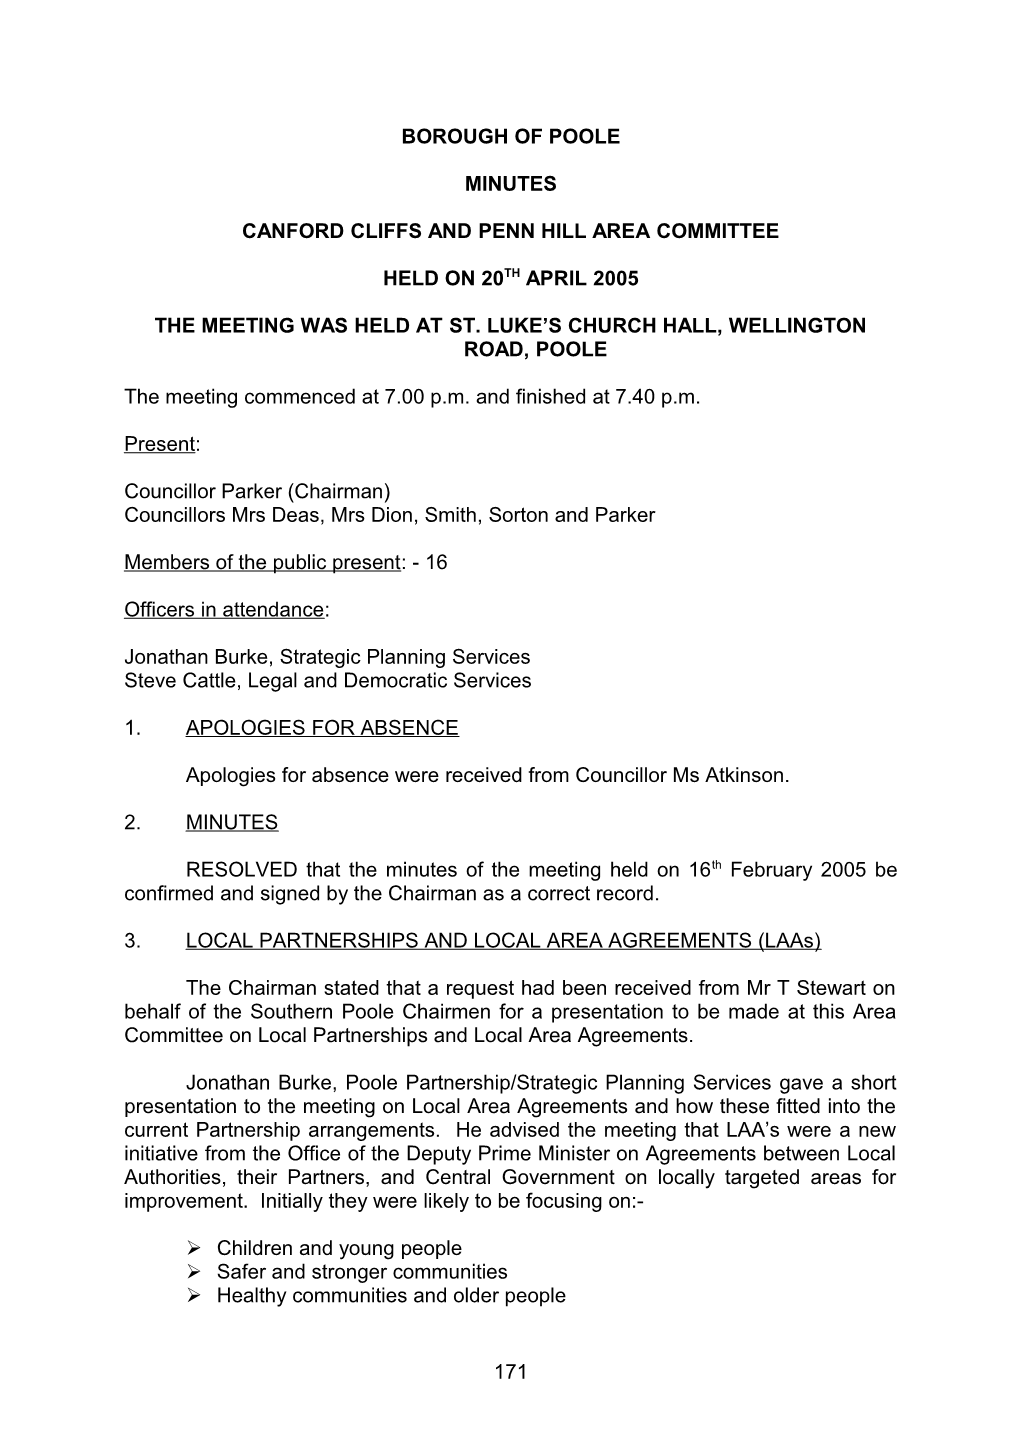 Minutes - Canford Cliffs and Penn Hill Area Committee - 20Th April 2005